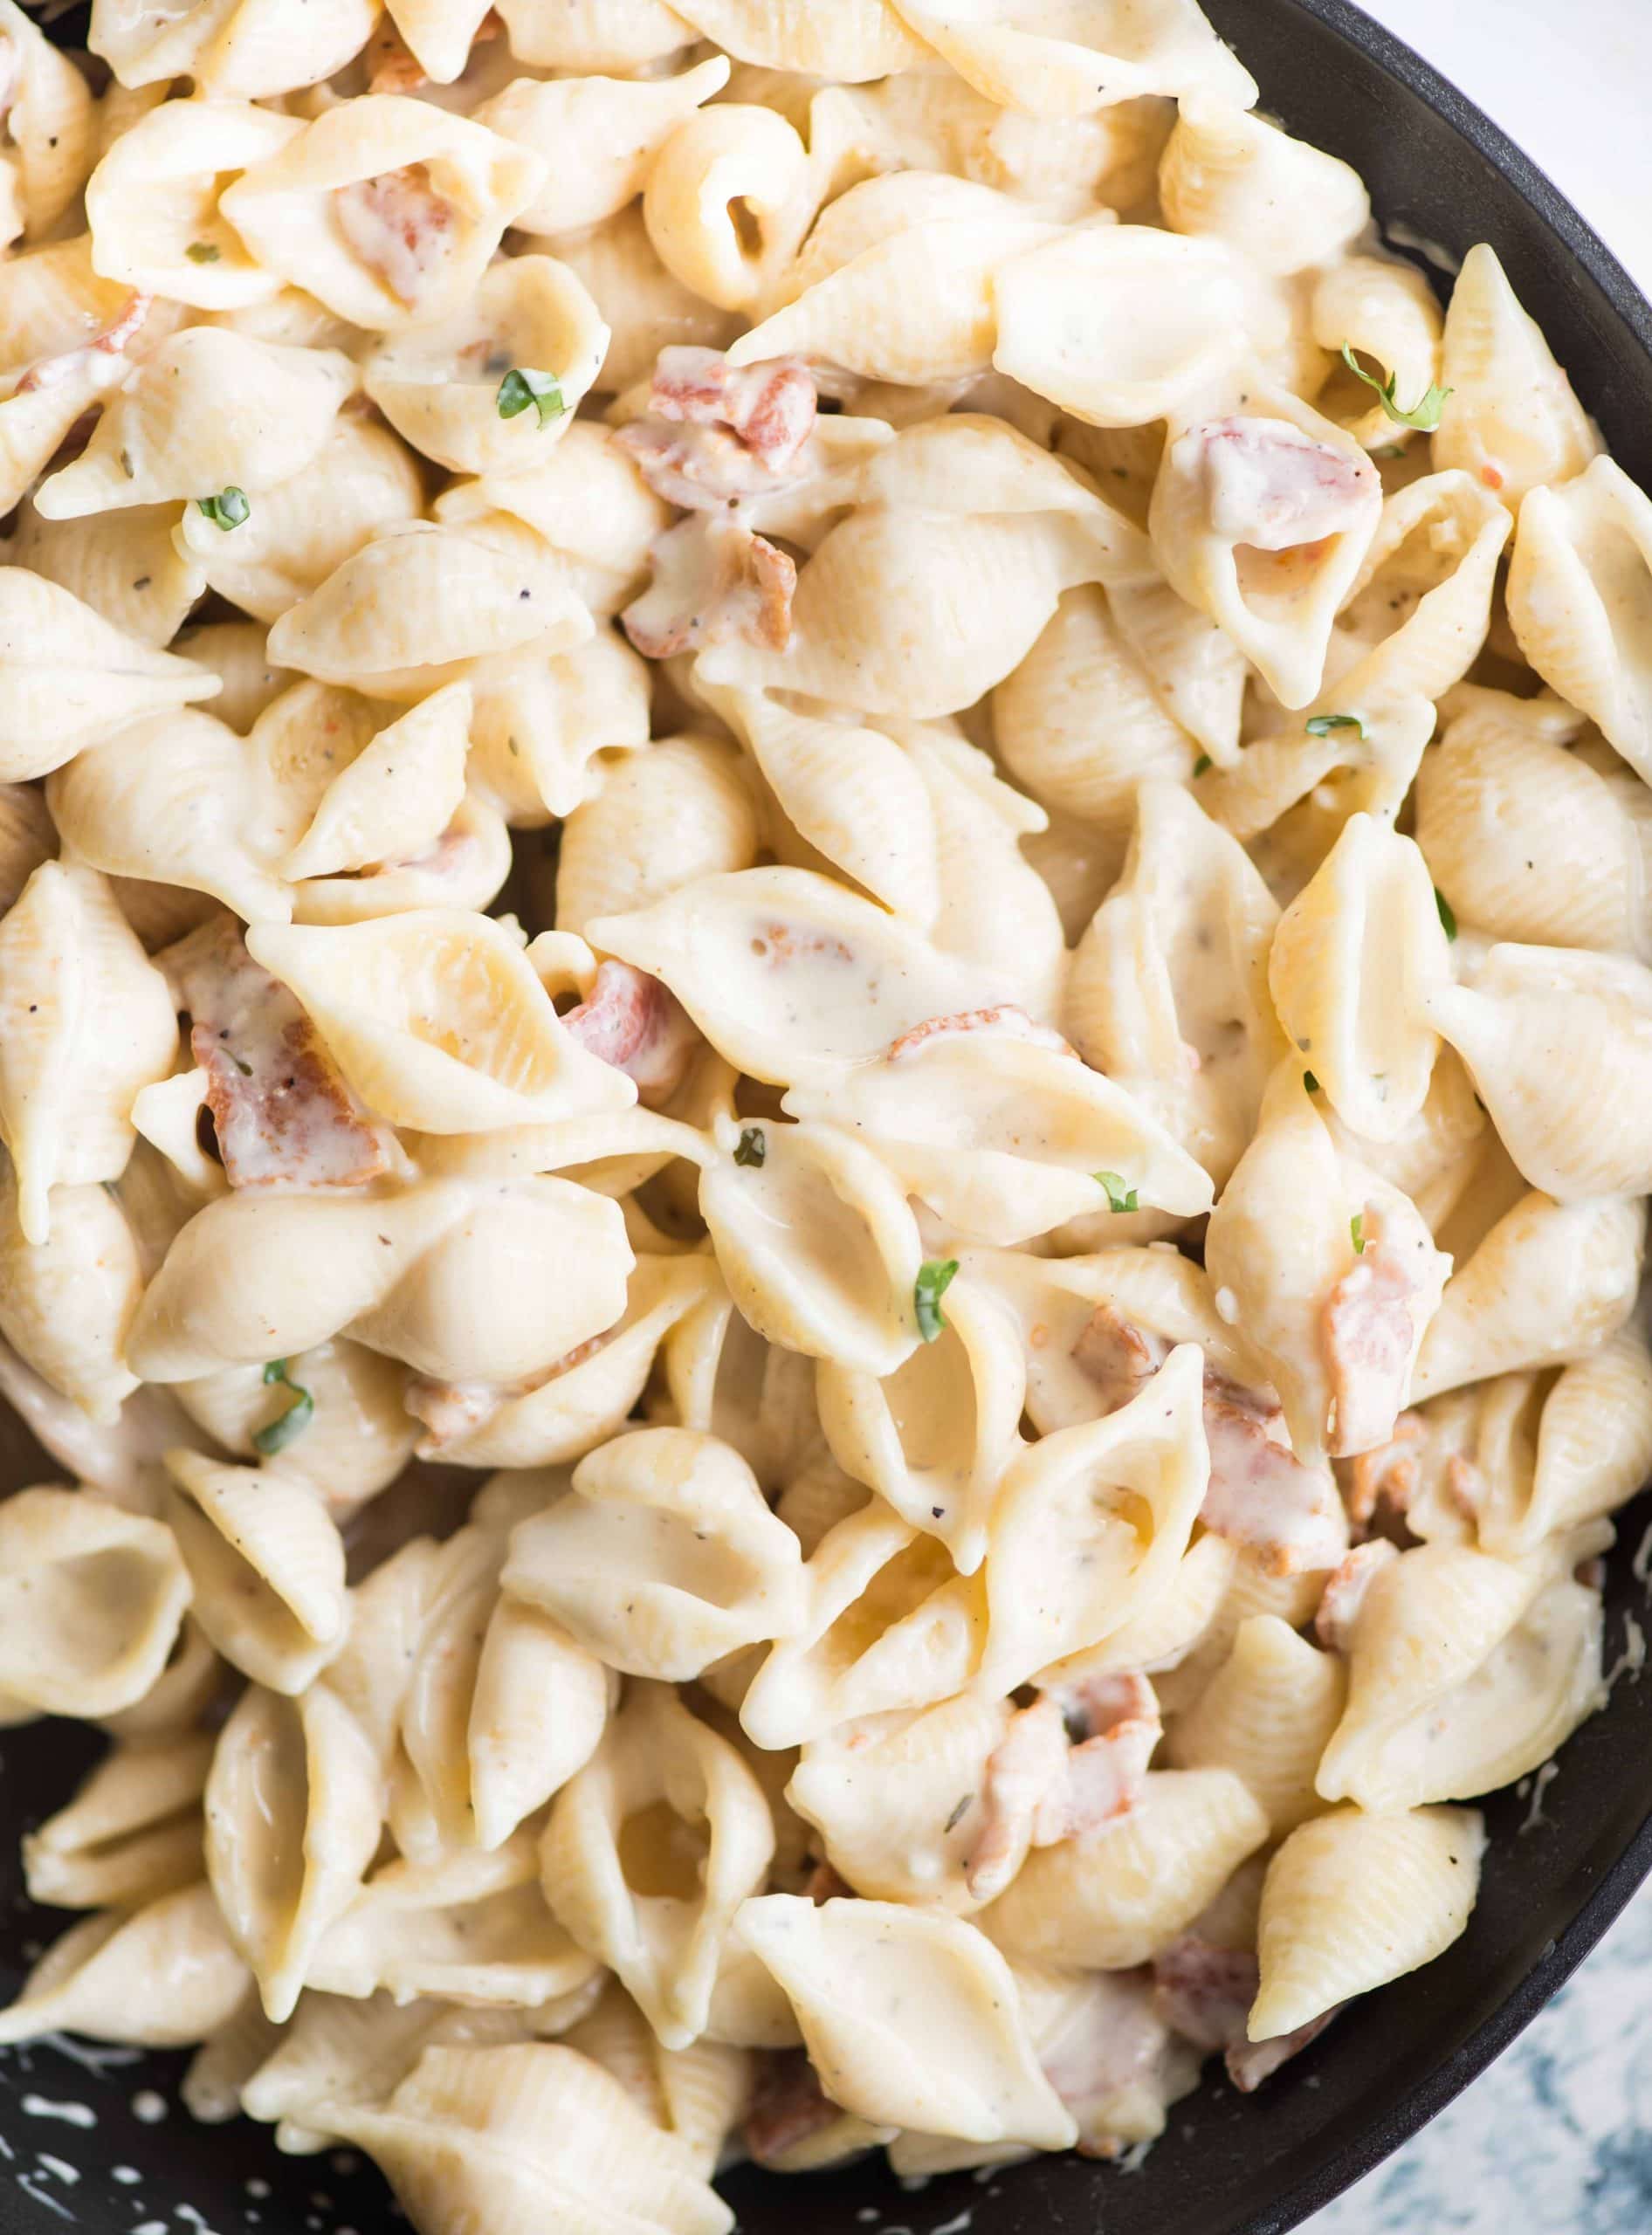 A quick and easy Shell pasta dish in a garlic cream cheese sauce and bacon. Utterly delicious !! This small shell pasta dish can be made in less than 30 minutes. With some wine or protein as sides, this makes a tasty lunch or dinner.